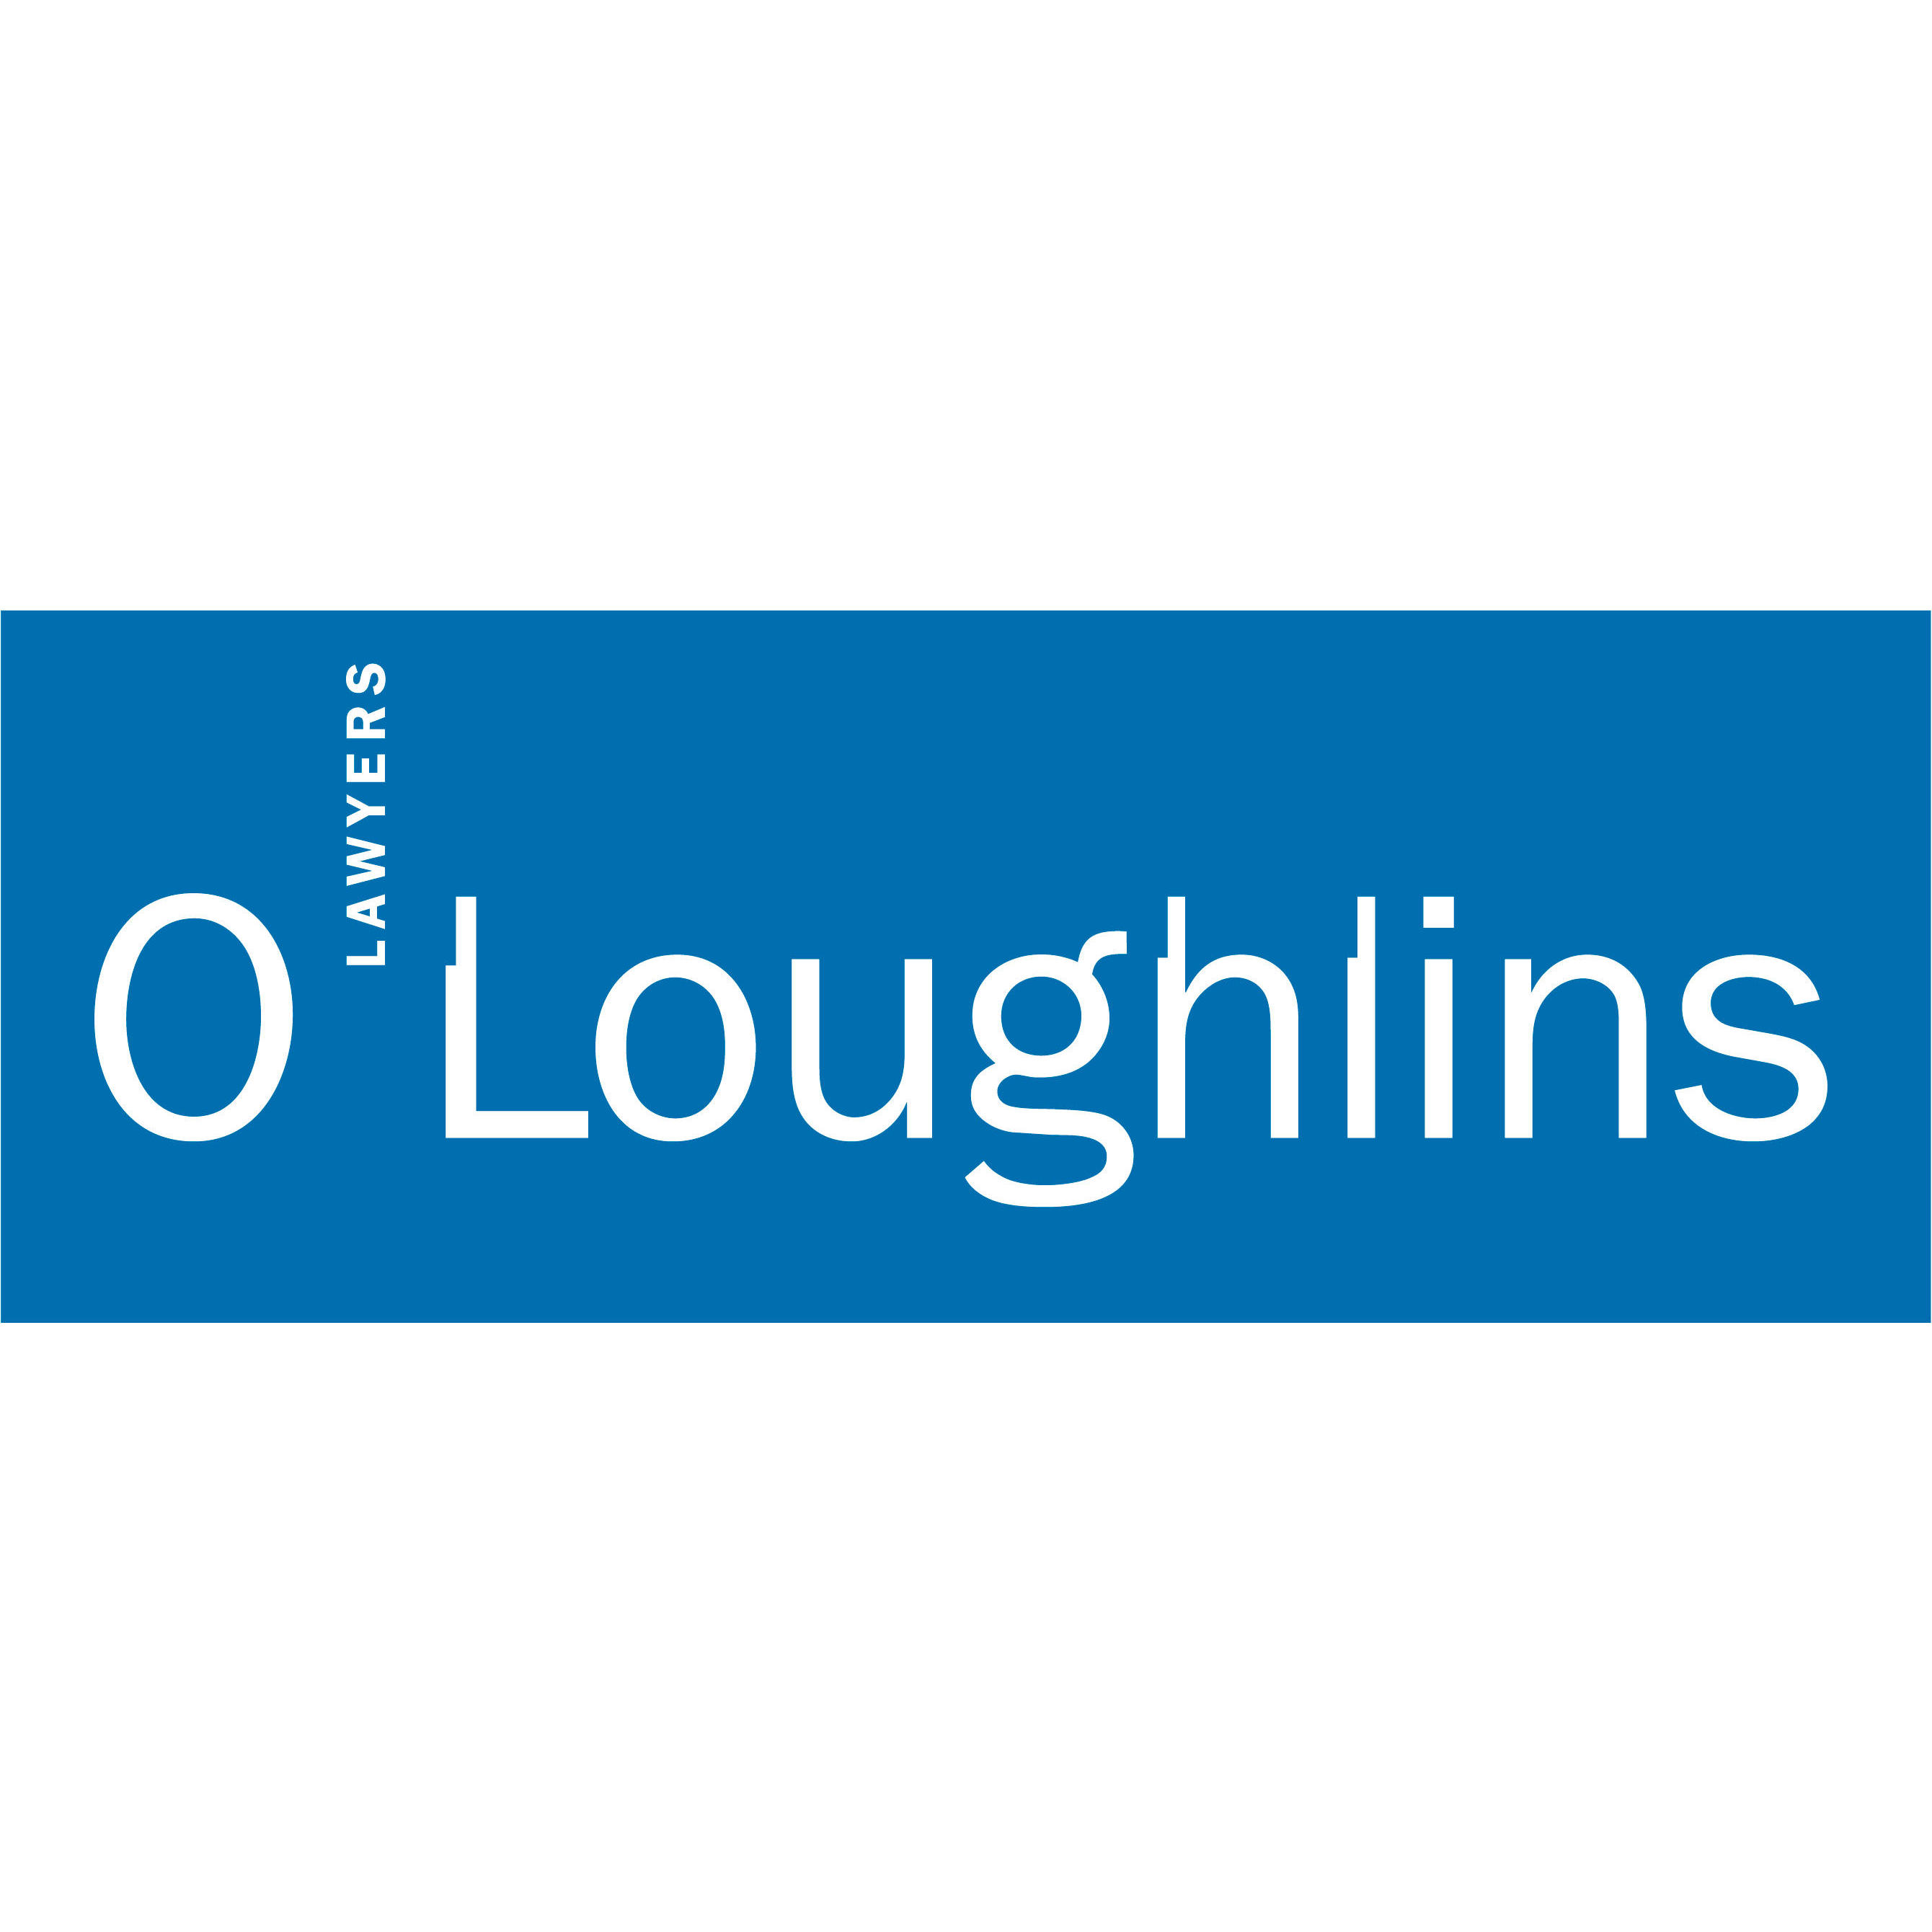 O'Loughlins Lawyers Adelaide (08) 8111 4000